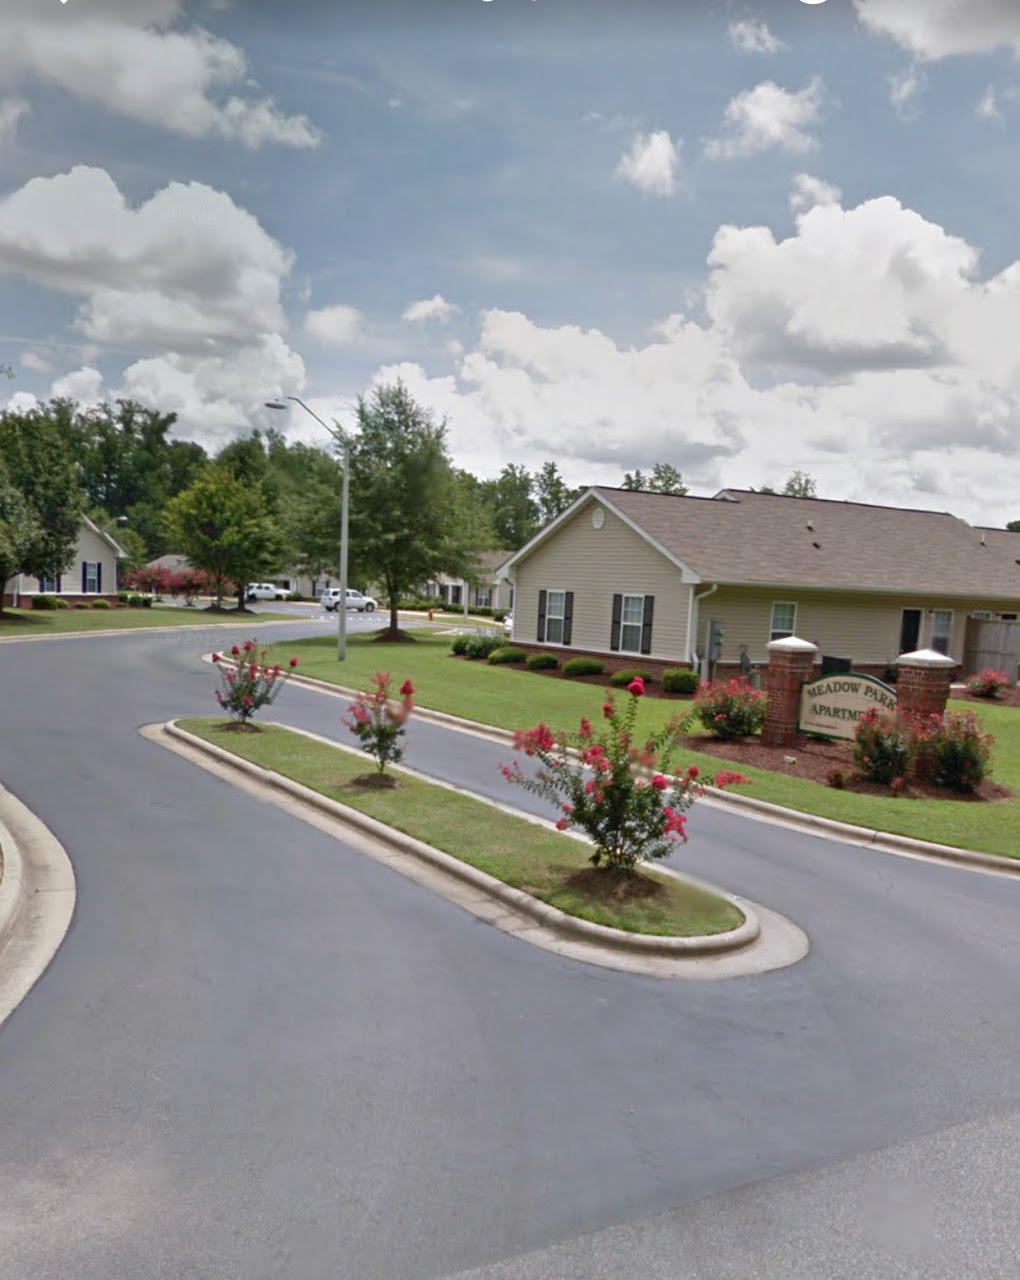 Photo of MEADOW PARK APTS. Affordable housing located at 313 MEADOW PARK DRIVE NASHVILLE, NC 27856